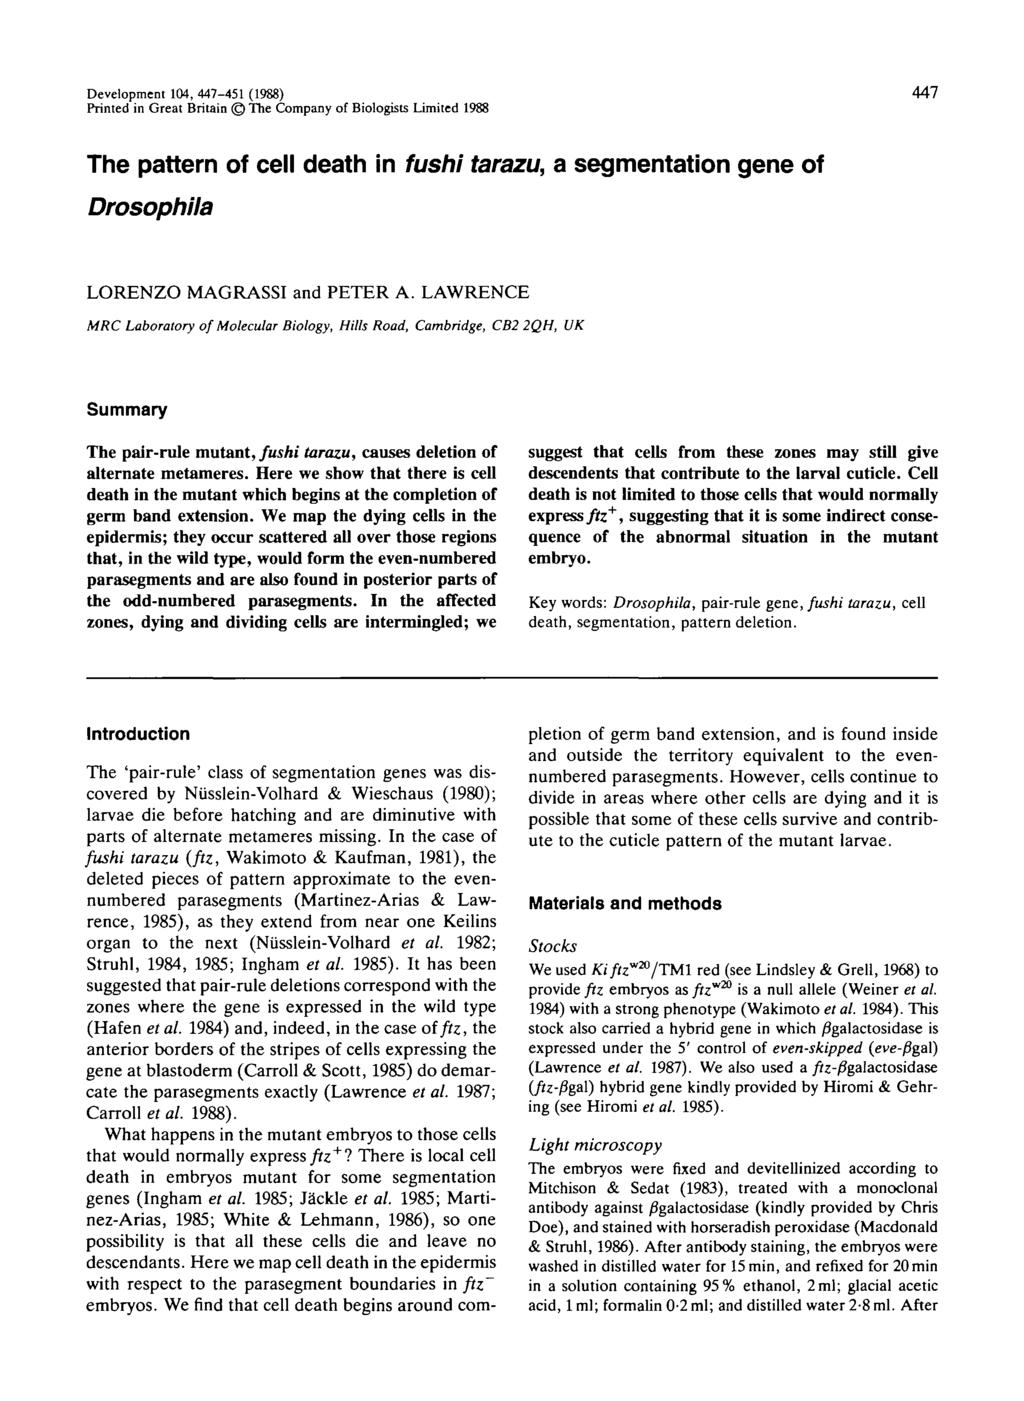 Development 104, 447-451 (1988) Printed in Great Britain The Company of Biologists Limited 1988 447 The pattern of cell death in fushi tarazu, a segmentation gene of Drosophila LORENZO MAGRASSI and